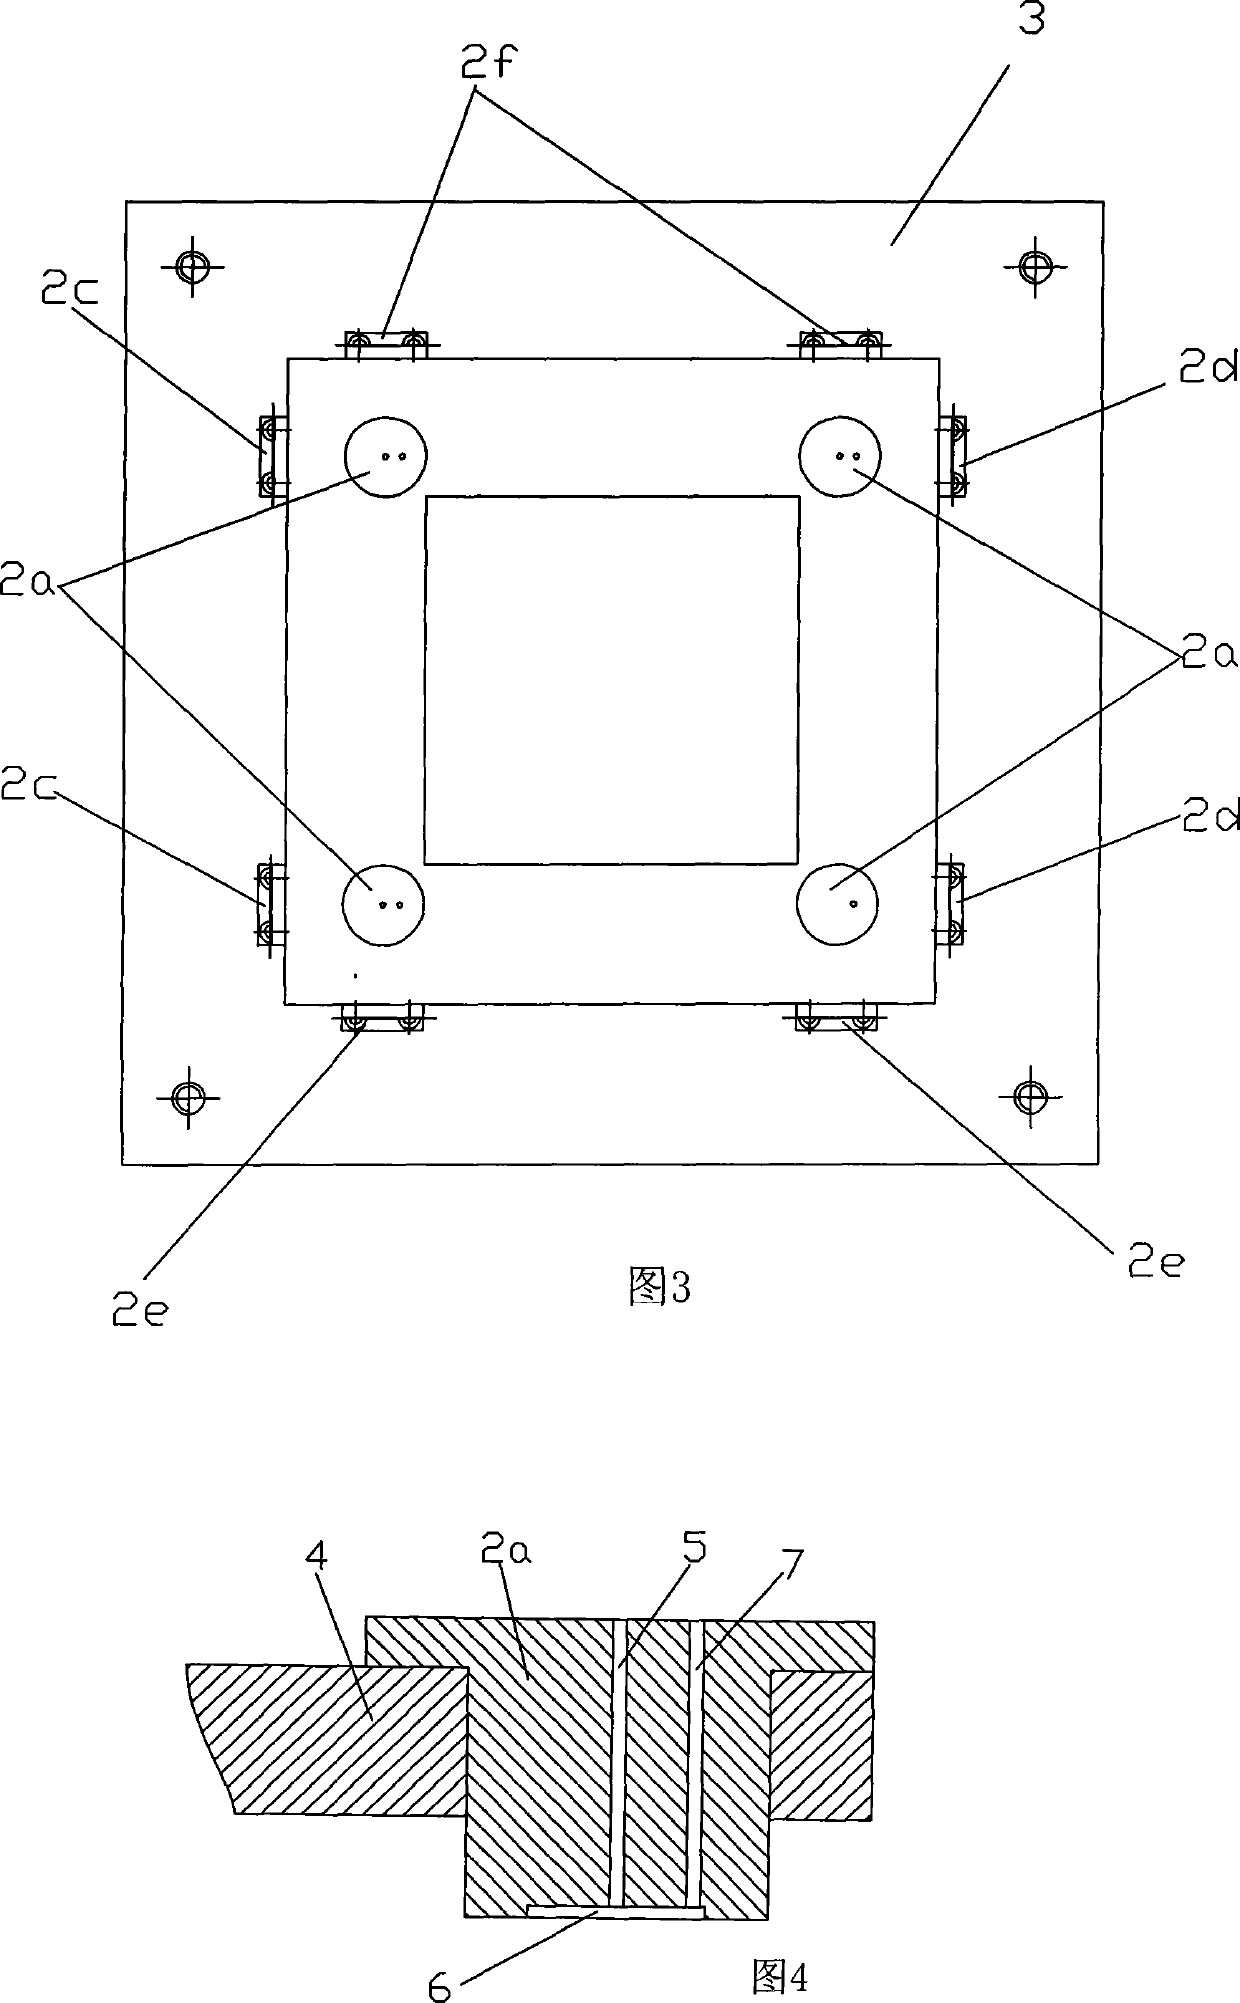 Air-floating type multidimensional force sensor and multidimensional force measuring method